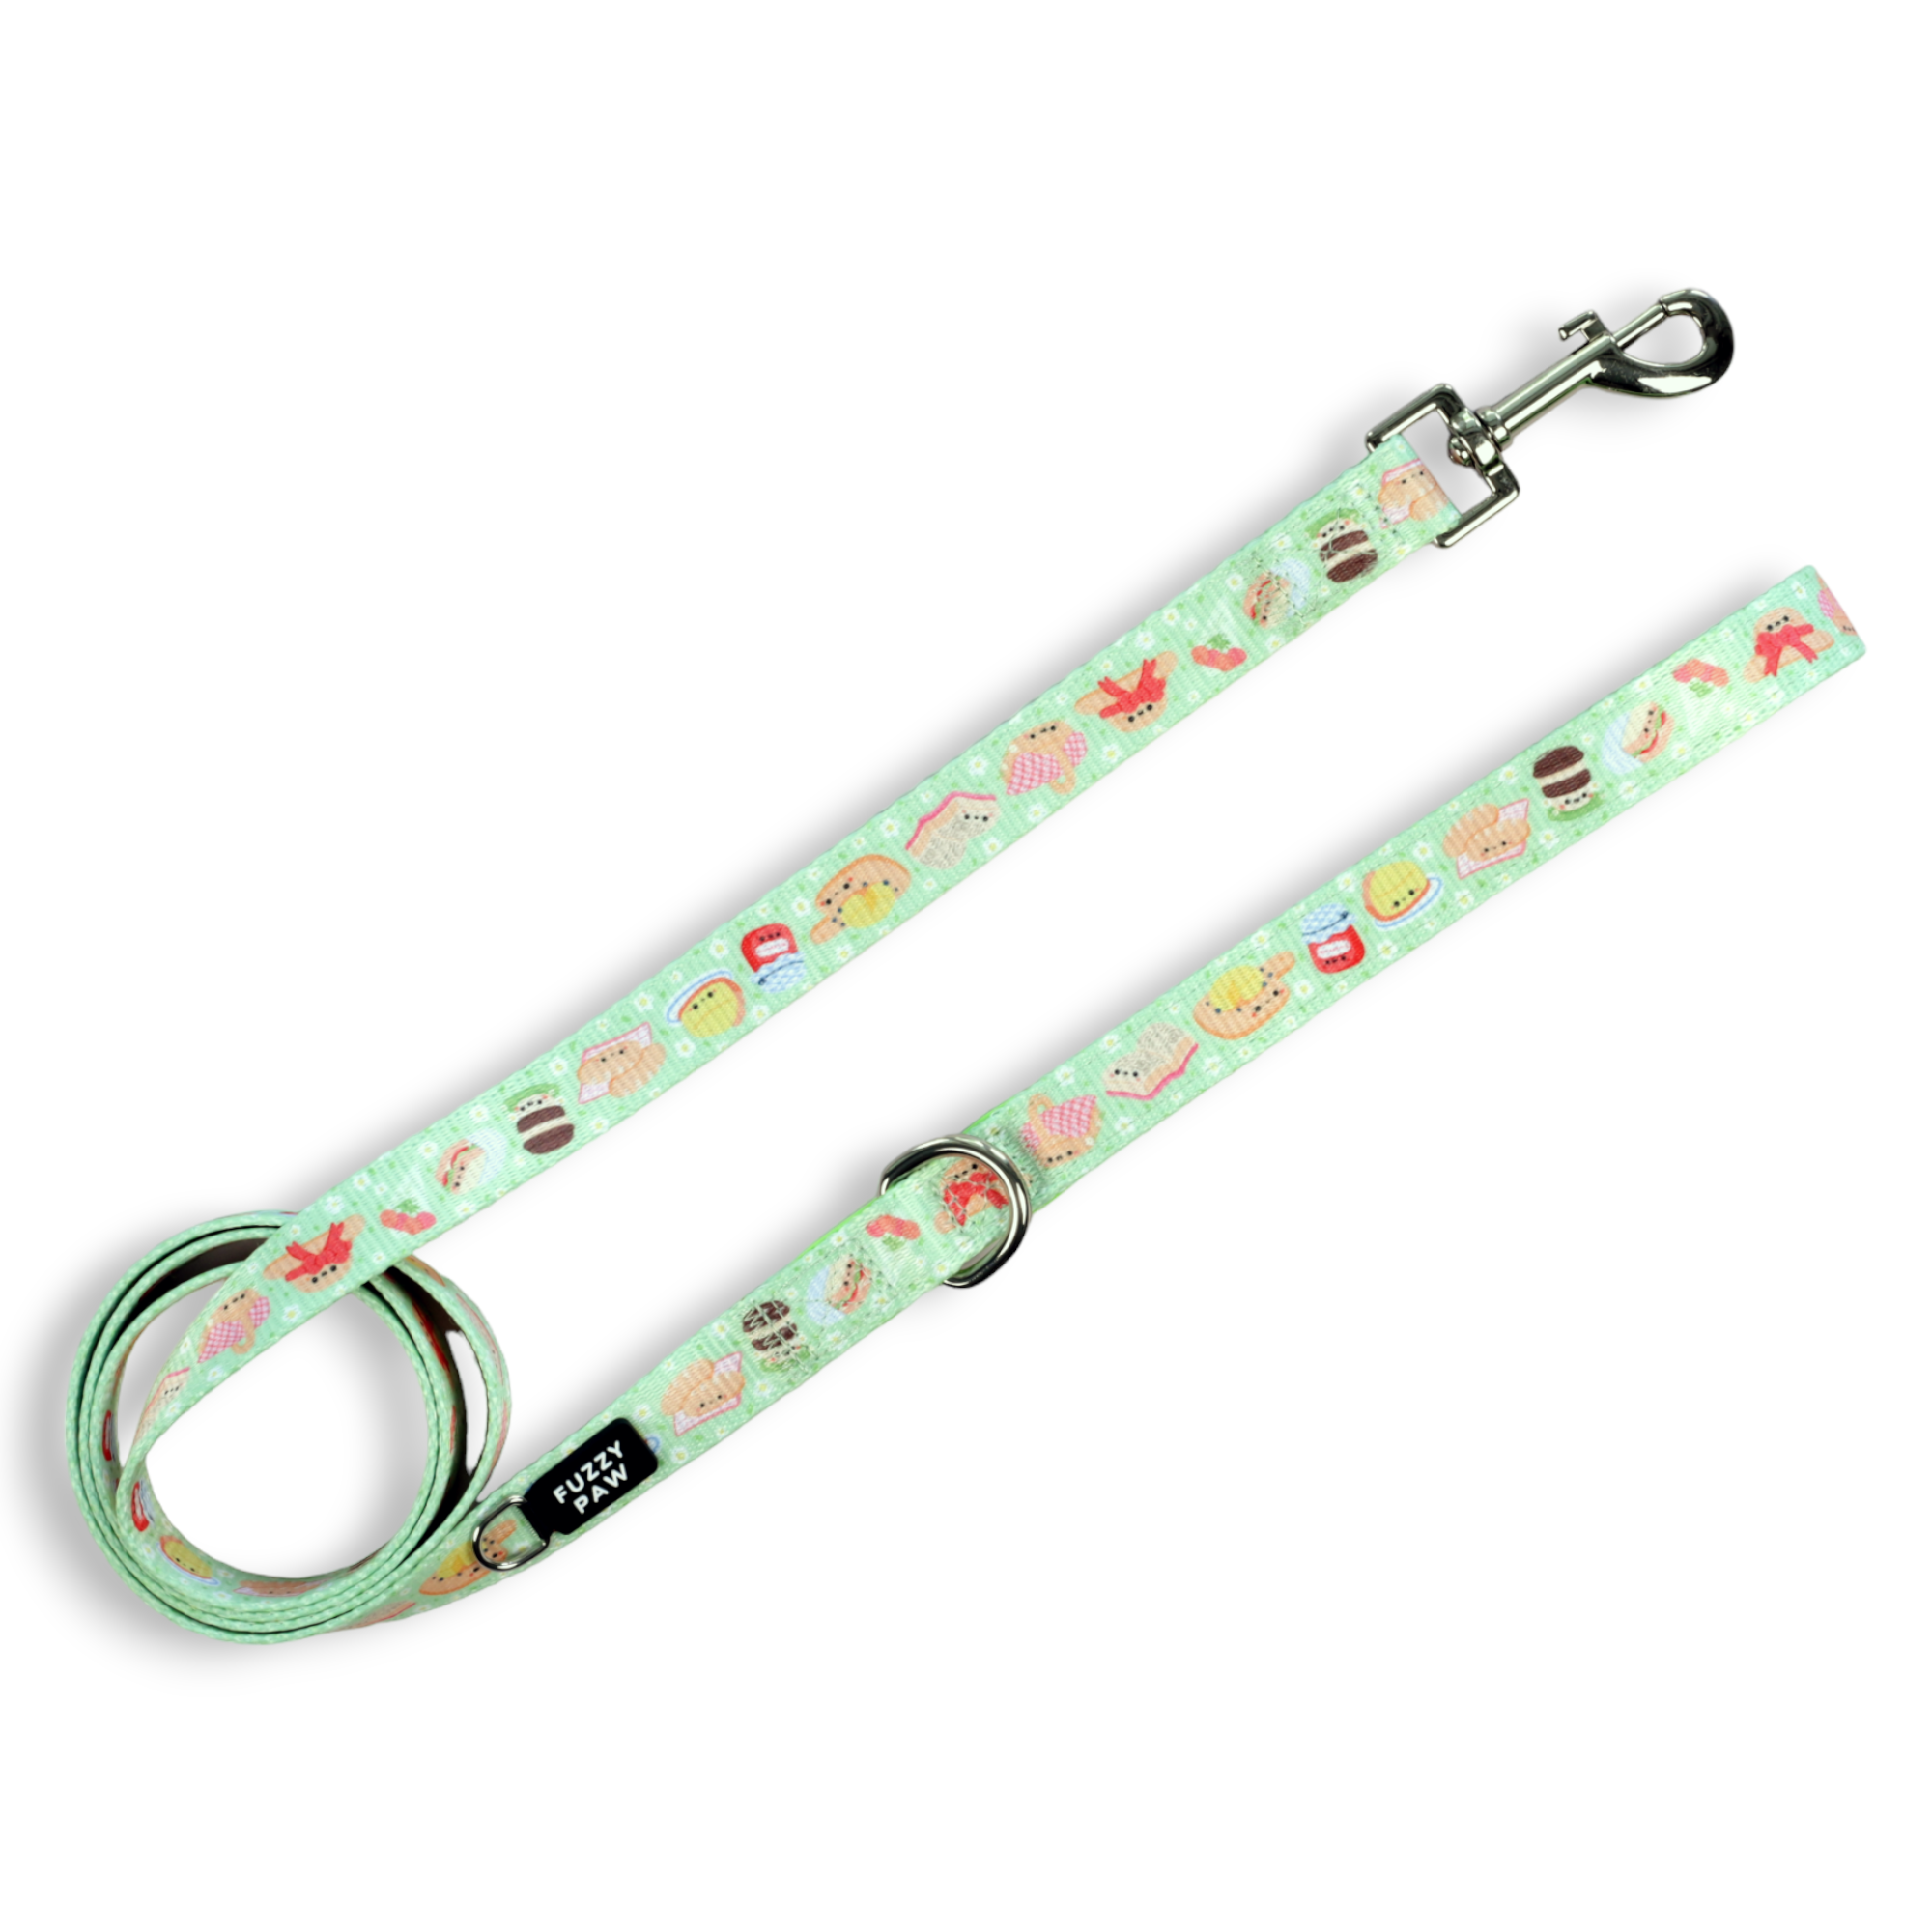 Paws & Ru  Dog Accessories - Harnesses, Collars, Leads & Poo Bags